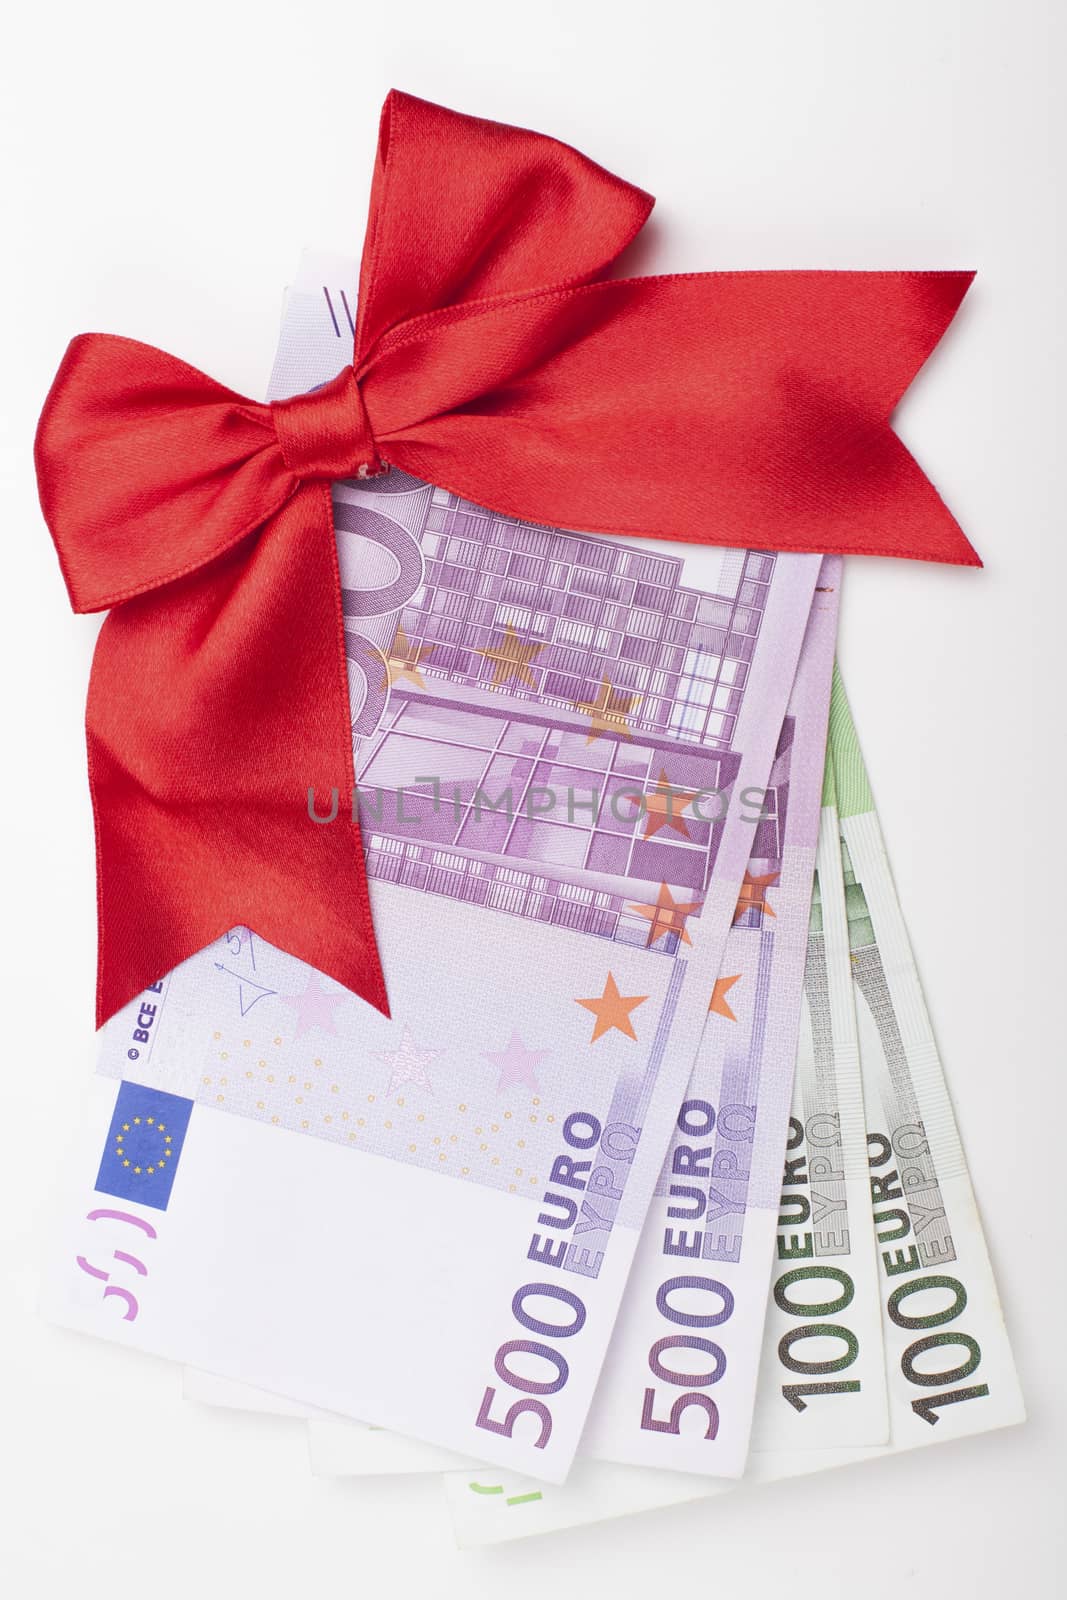 Euro banknotes with red ribbon isolated on white backgroound